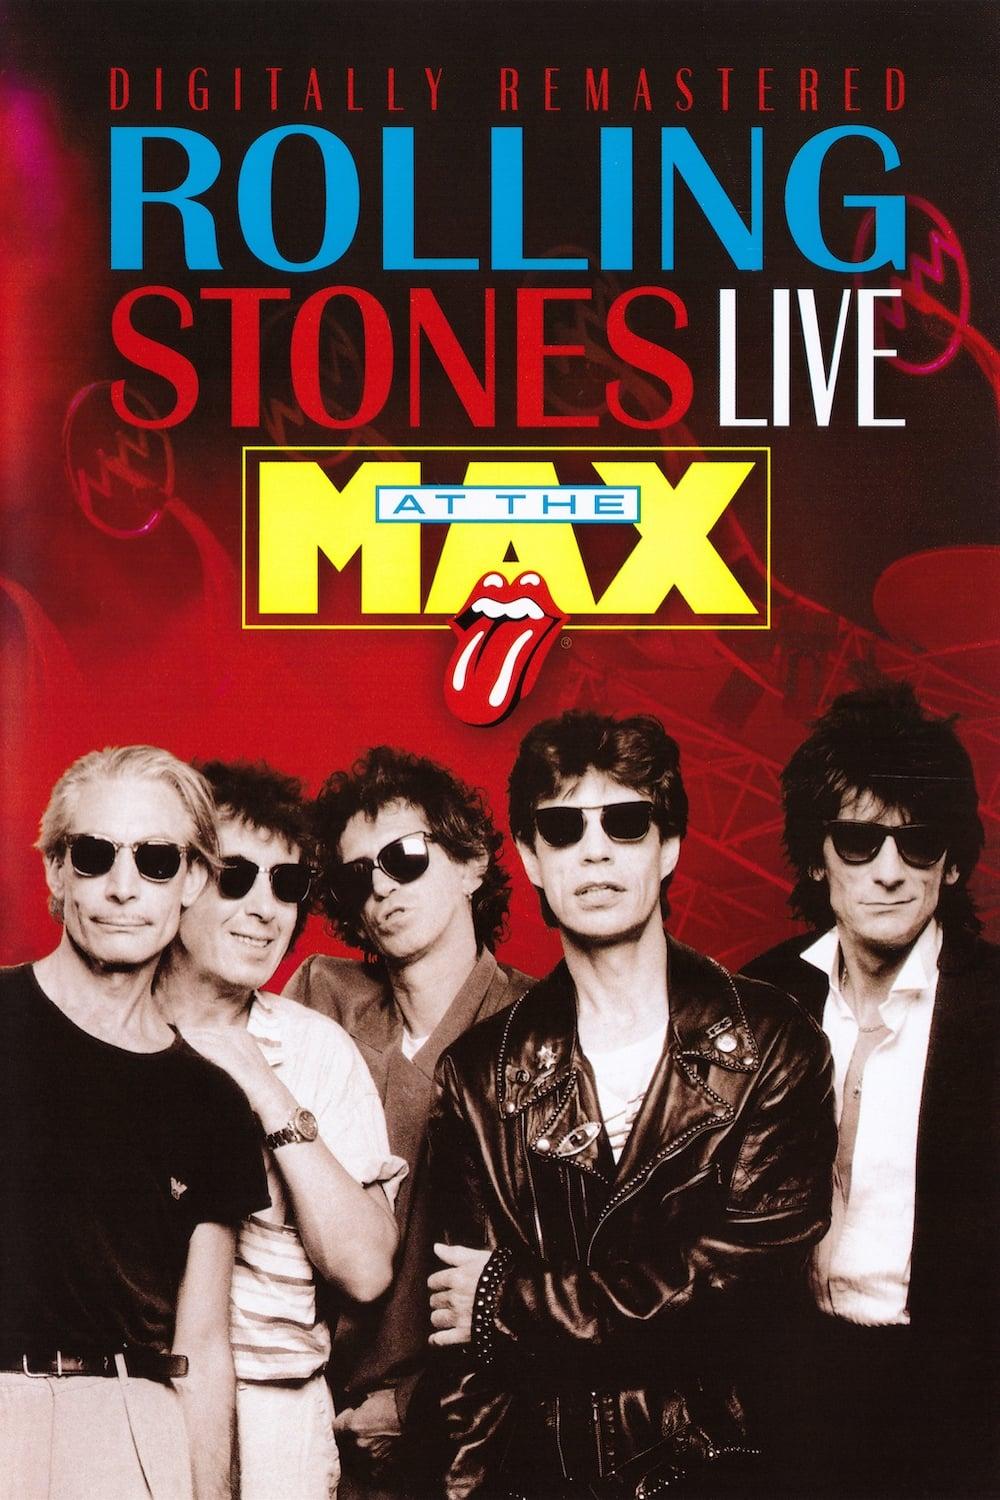 The Rolling Stones: Live at the Max poster